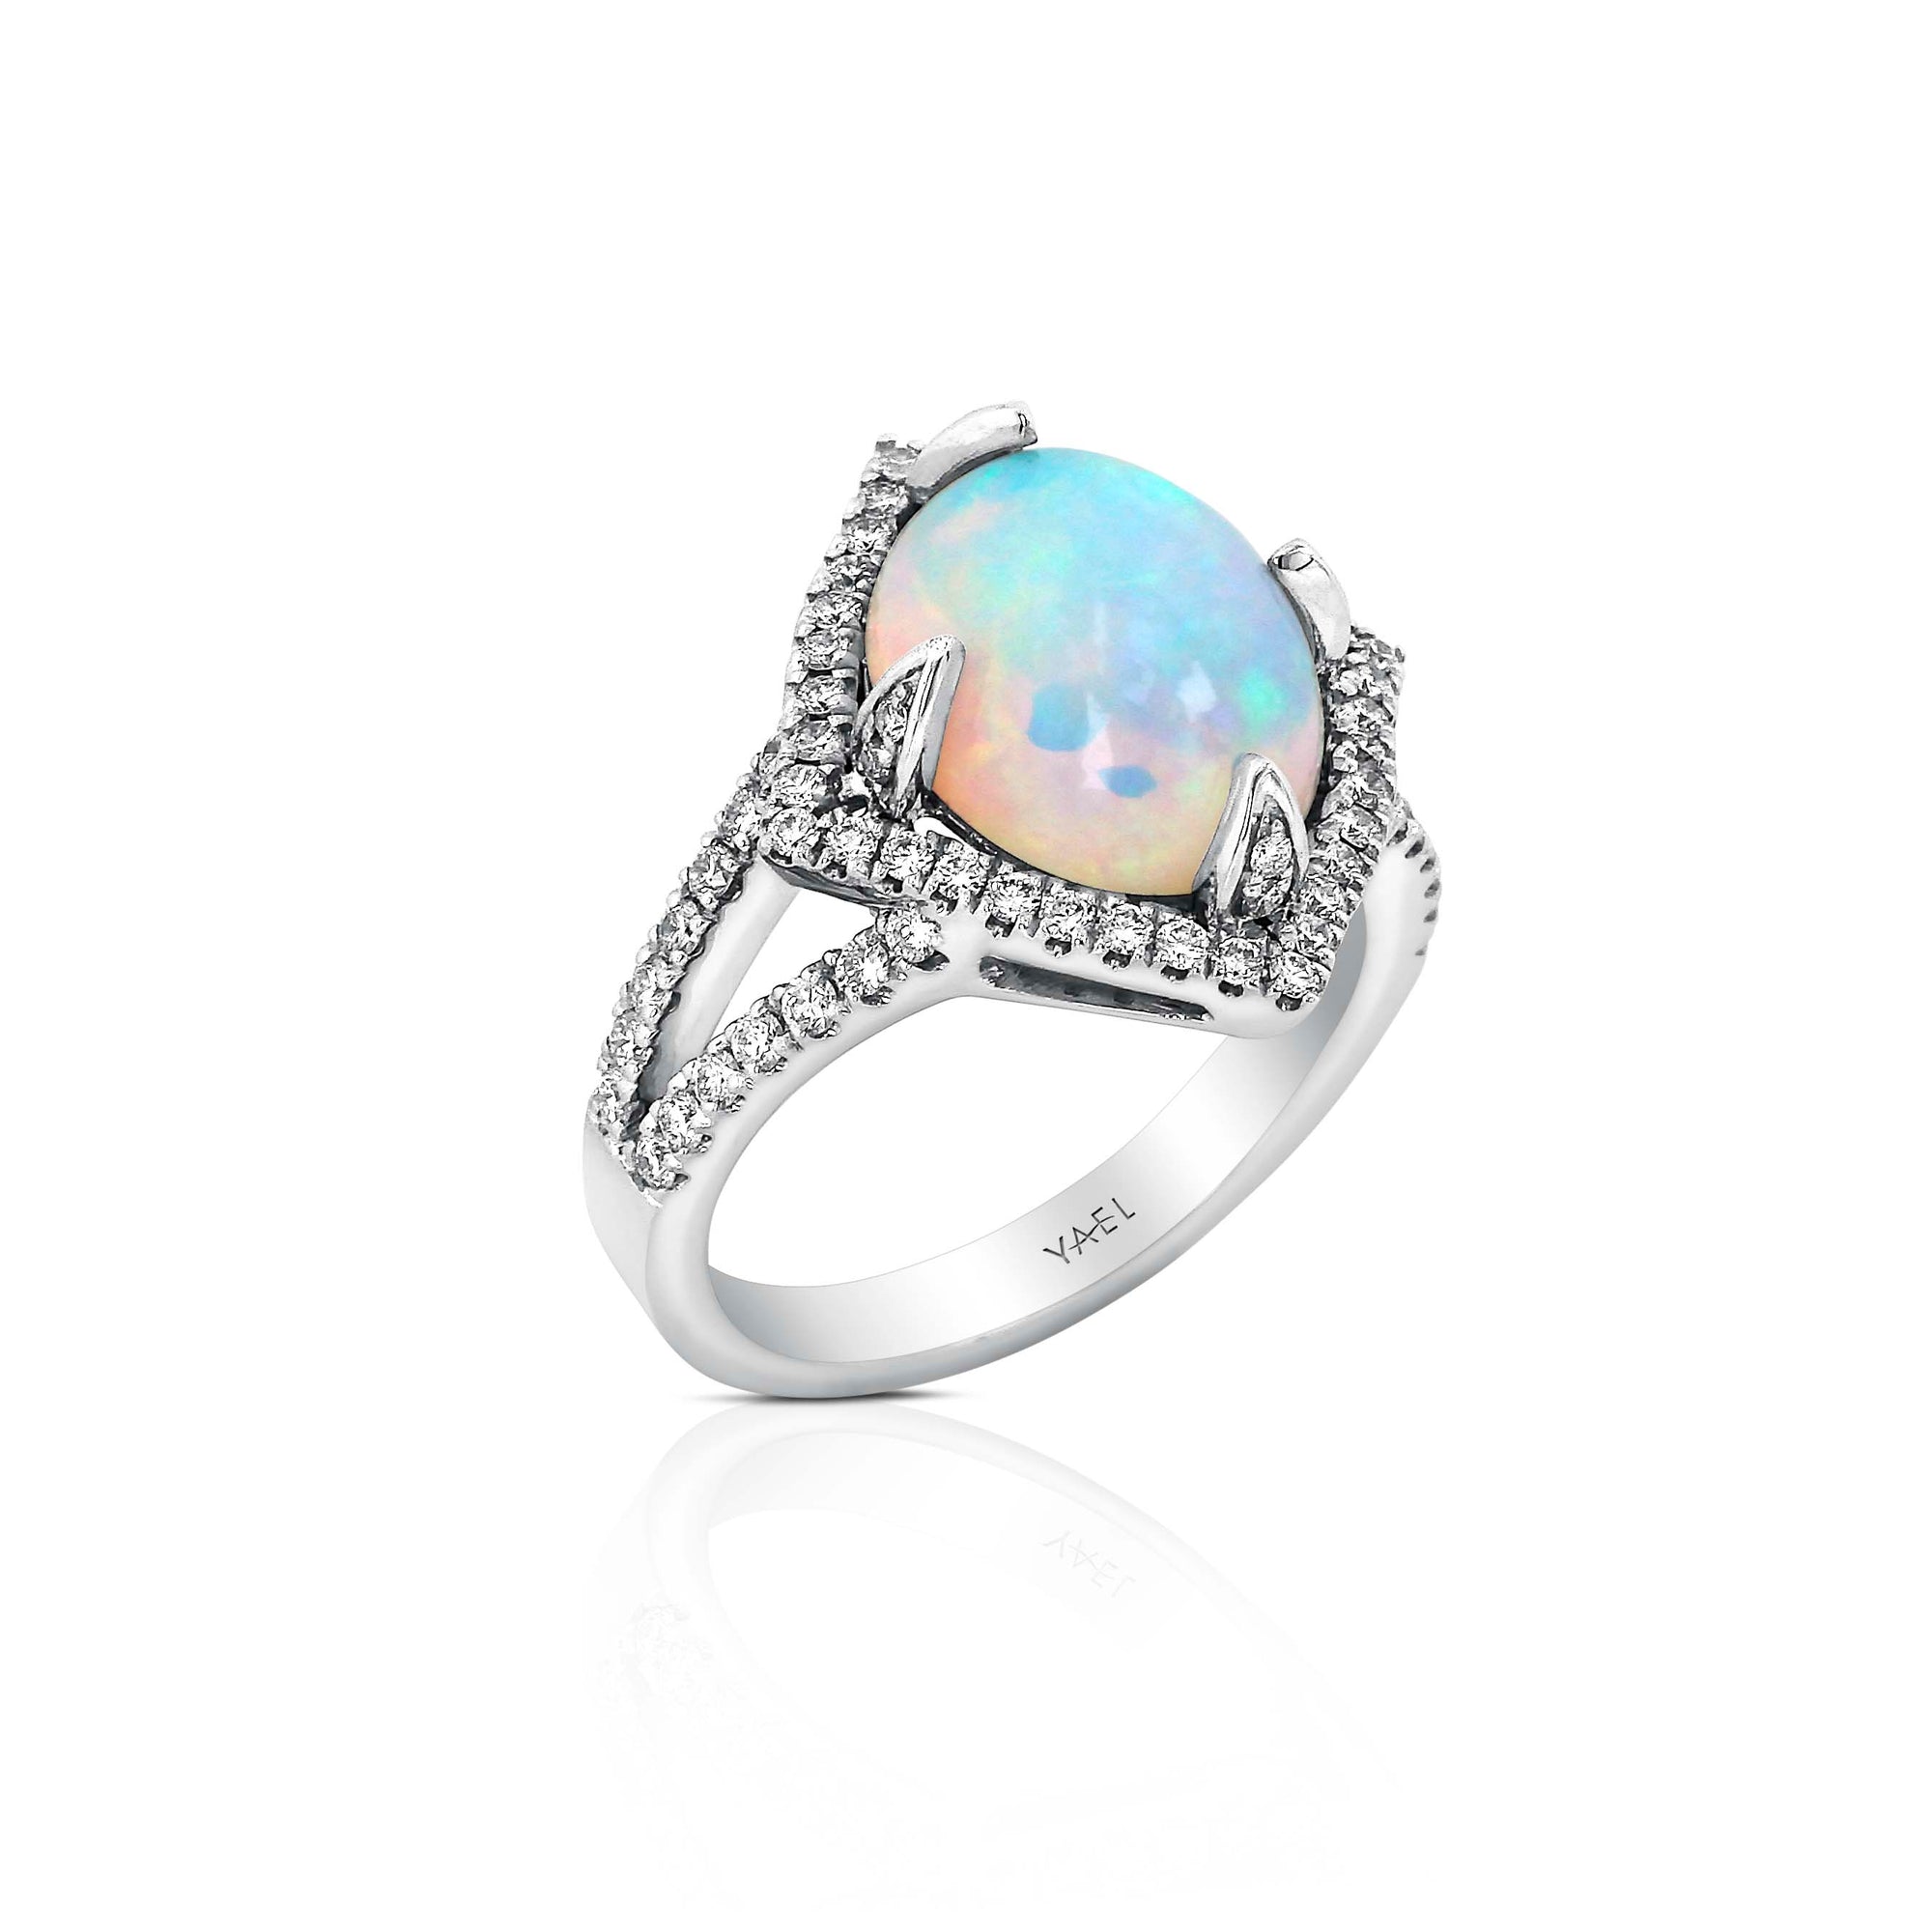 Opal and Diamond Ring by Yael - White Gold - Talisman Collection Fine Jewelers